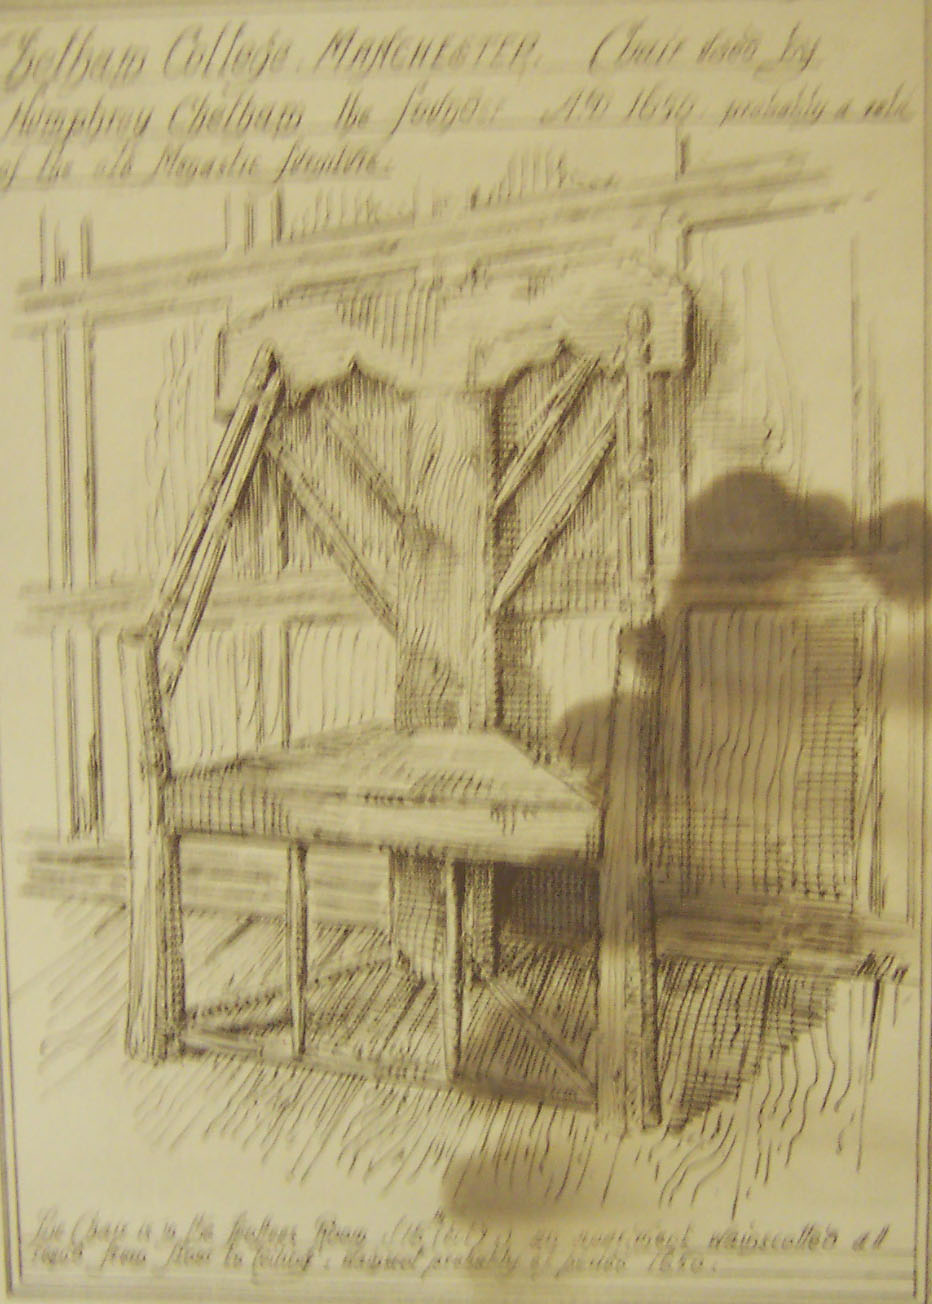 Chetham College, Manchester: Chair used by Humphrey Chetham